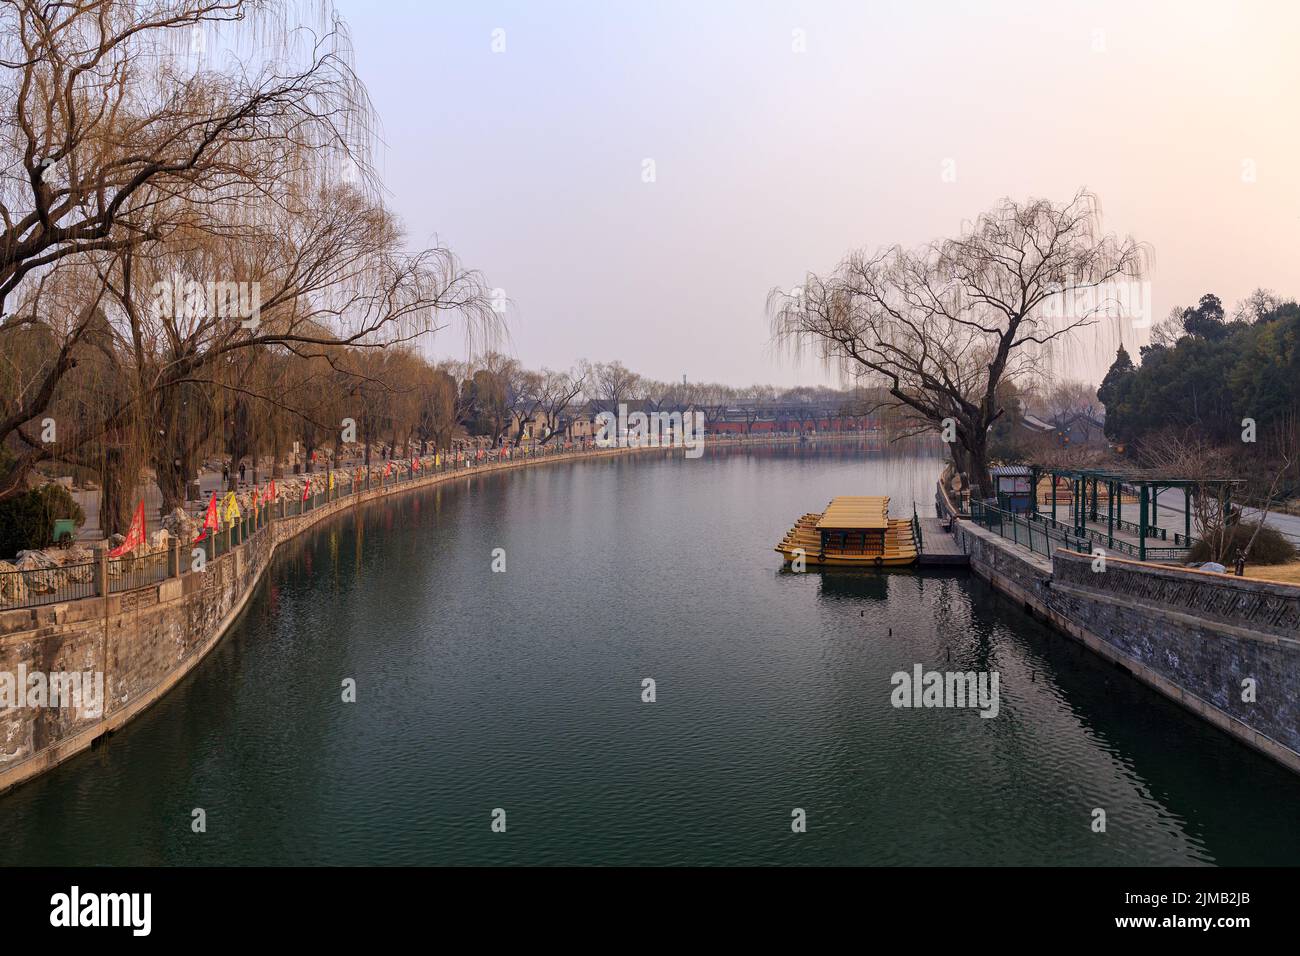 At a small, urban body of water in Beijing, China. Stock Photo